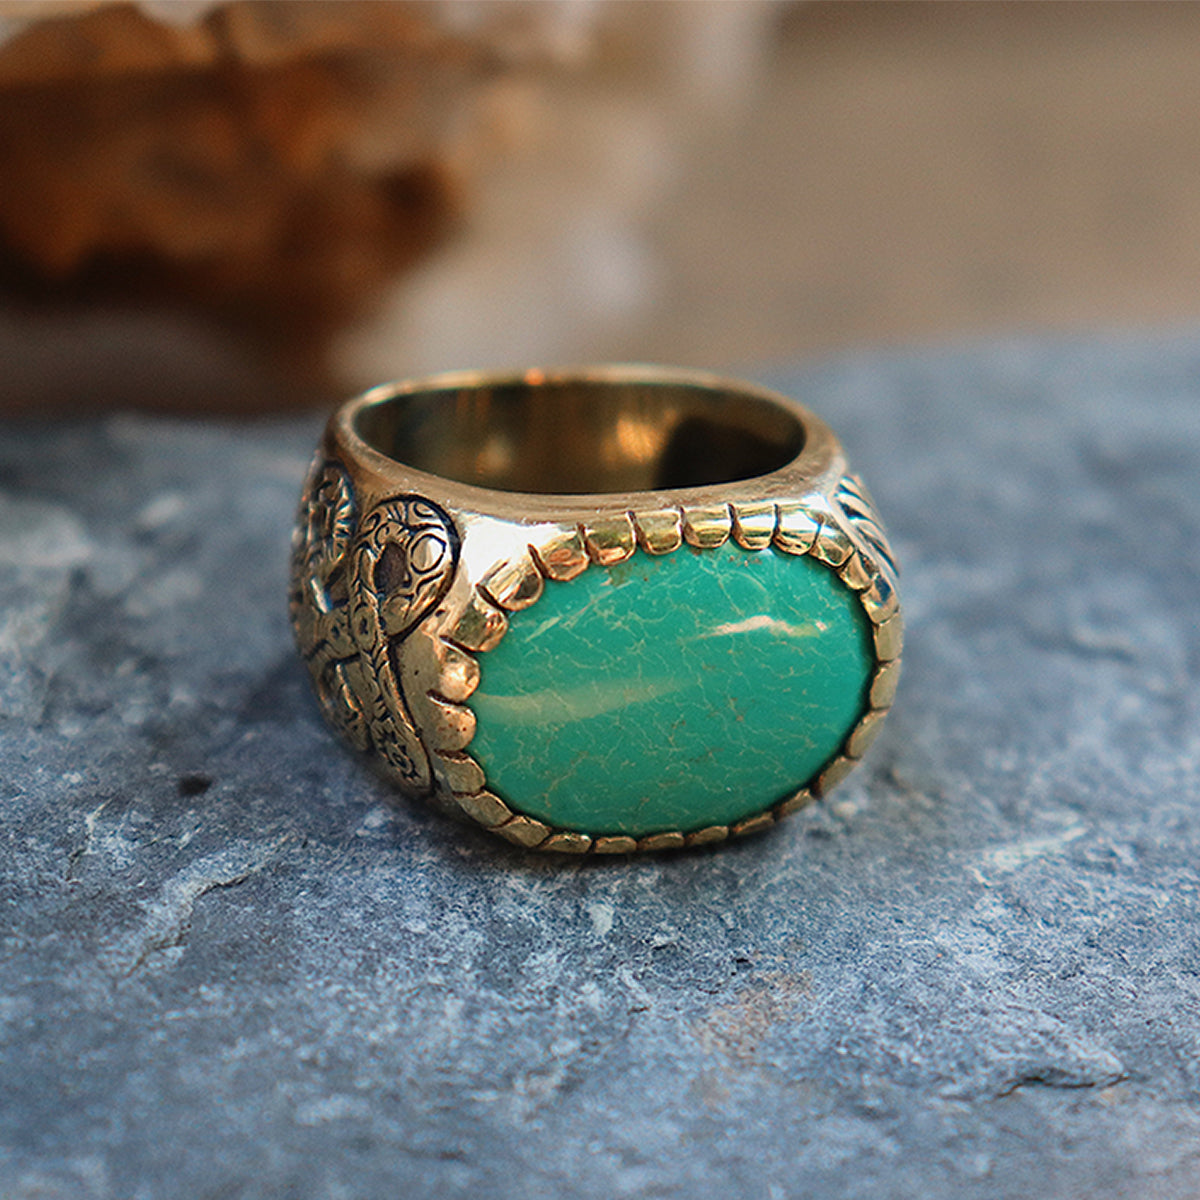 Men's Oval Simulated Turquoise Ring in Sterling Silver - Walmart.com